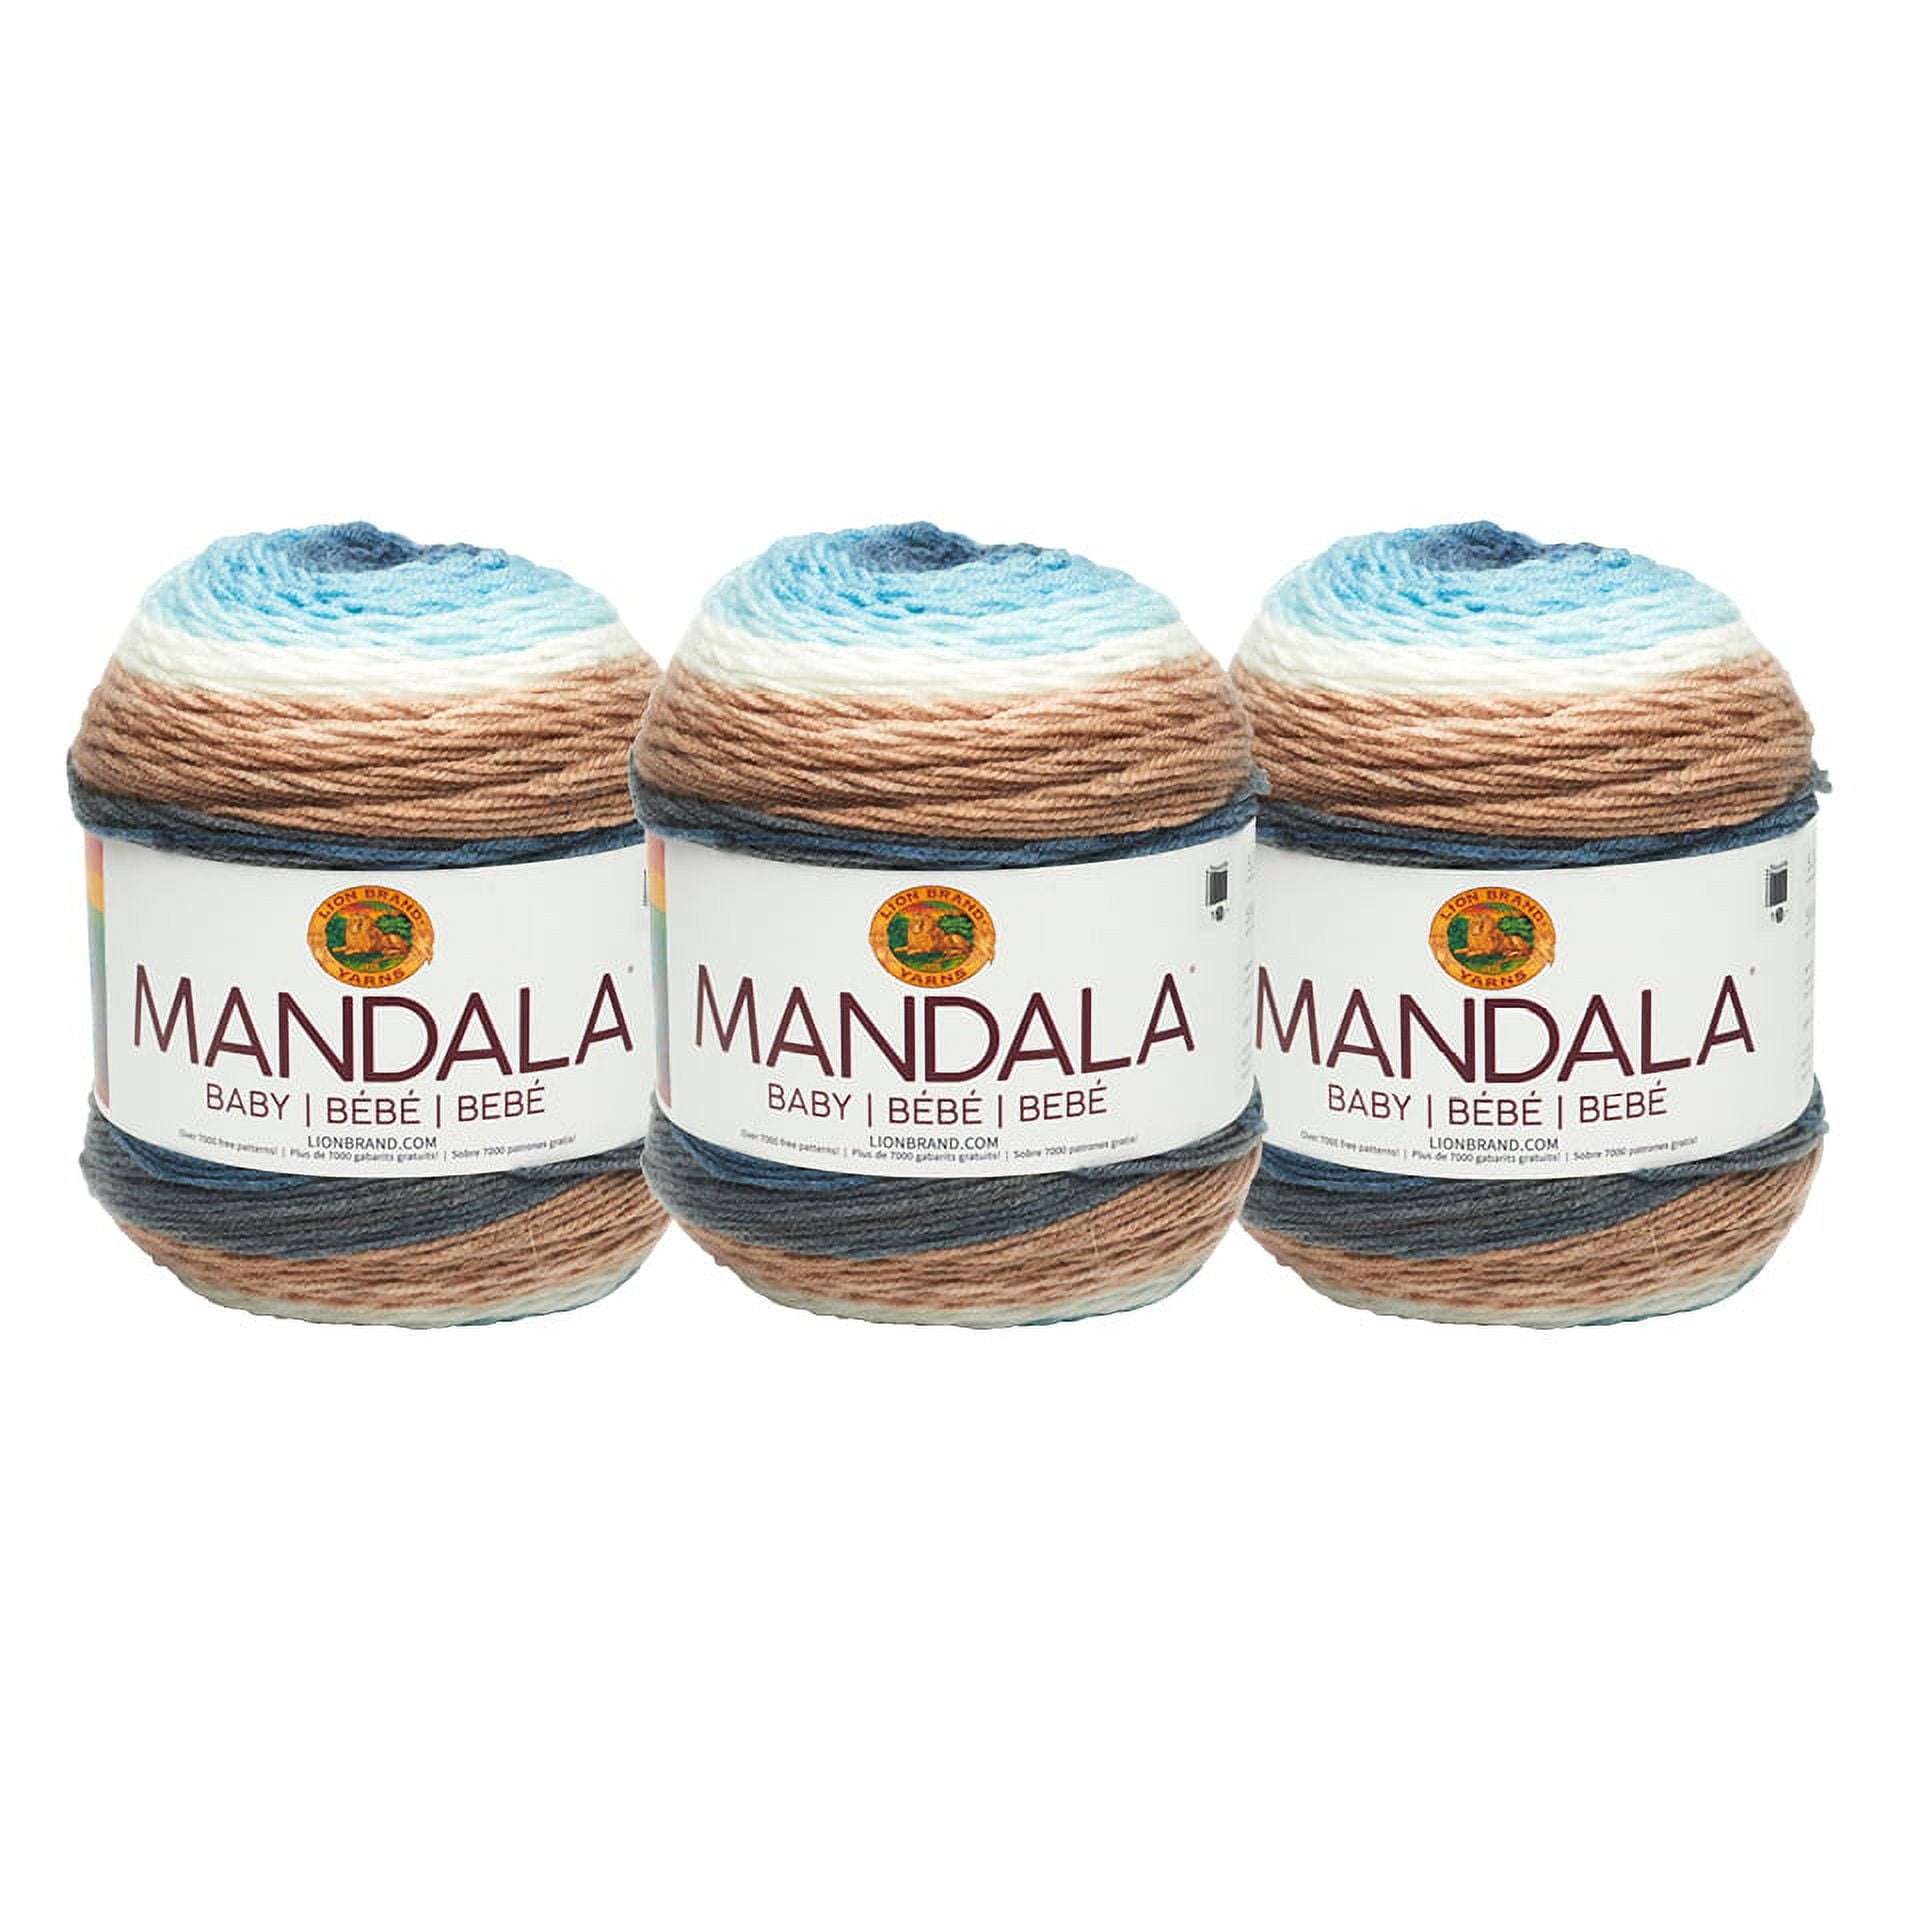 Lion Brand Mandala Yarn Review a 100% honest and unbiased review